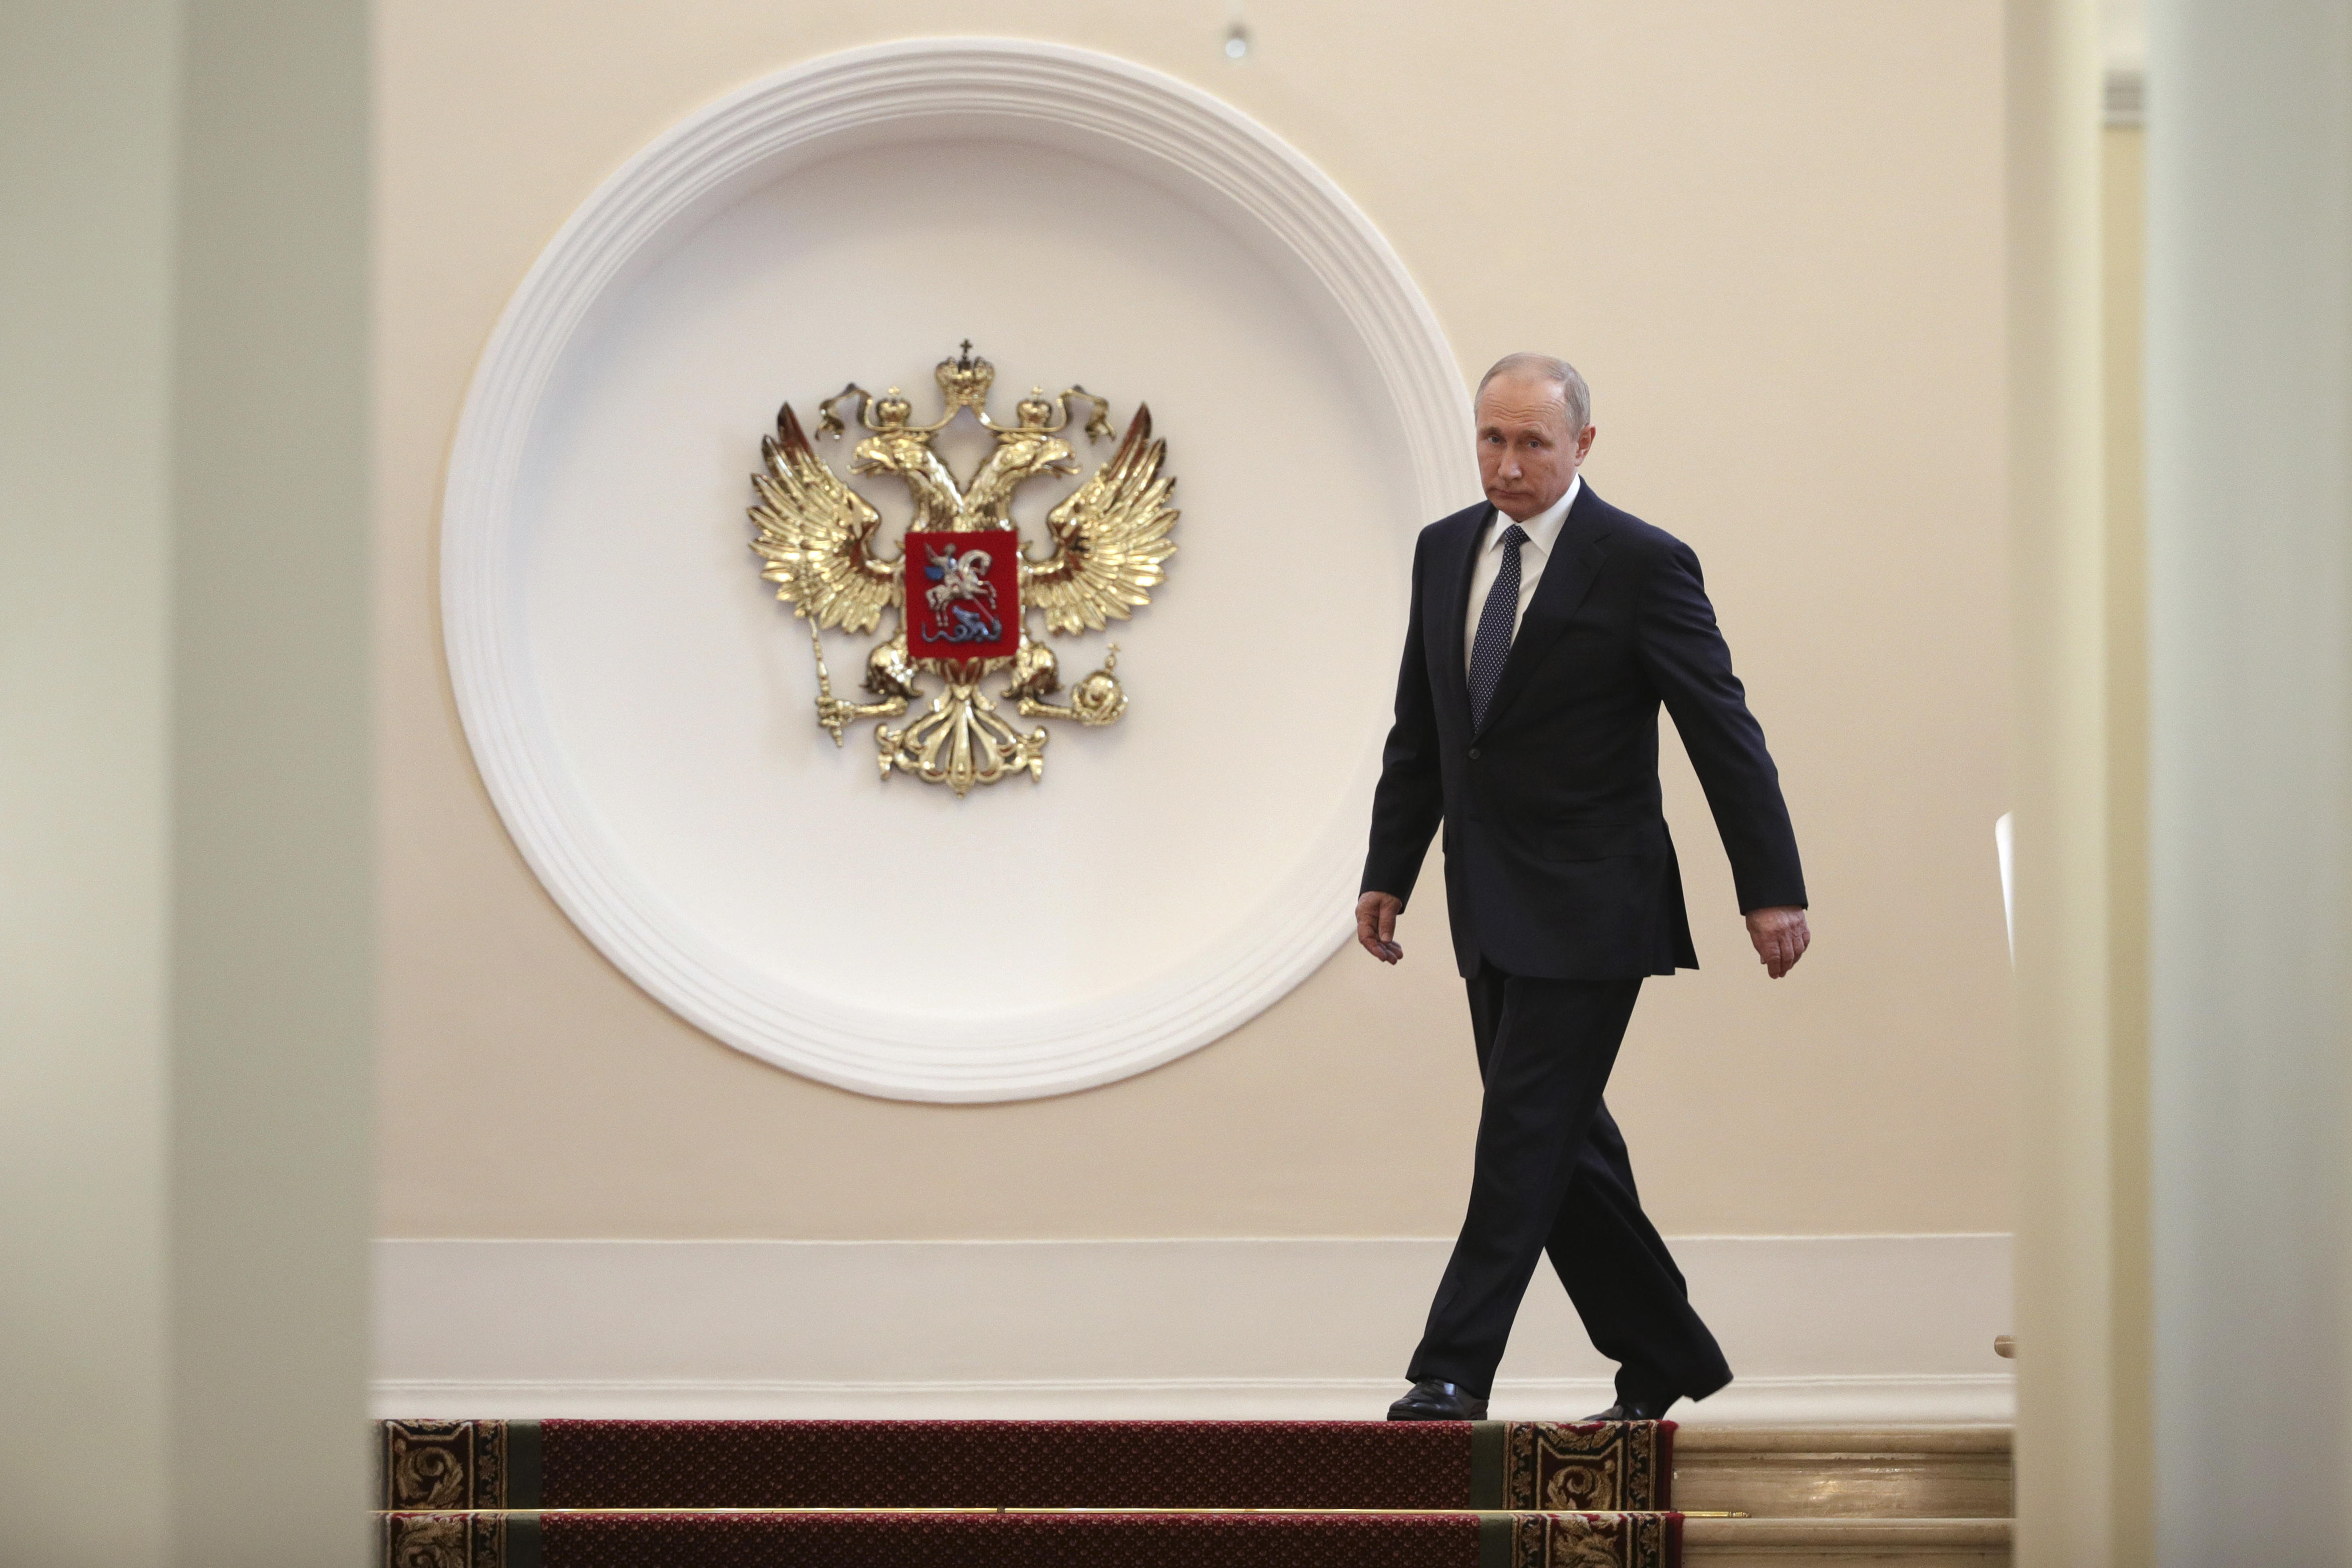 Vladimir Putin inaugurated for 4th term as President of Russia today 201857 CBS News